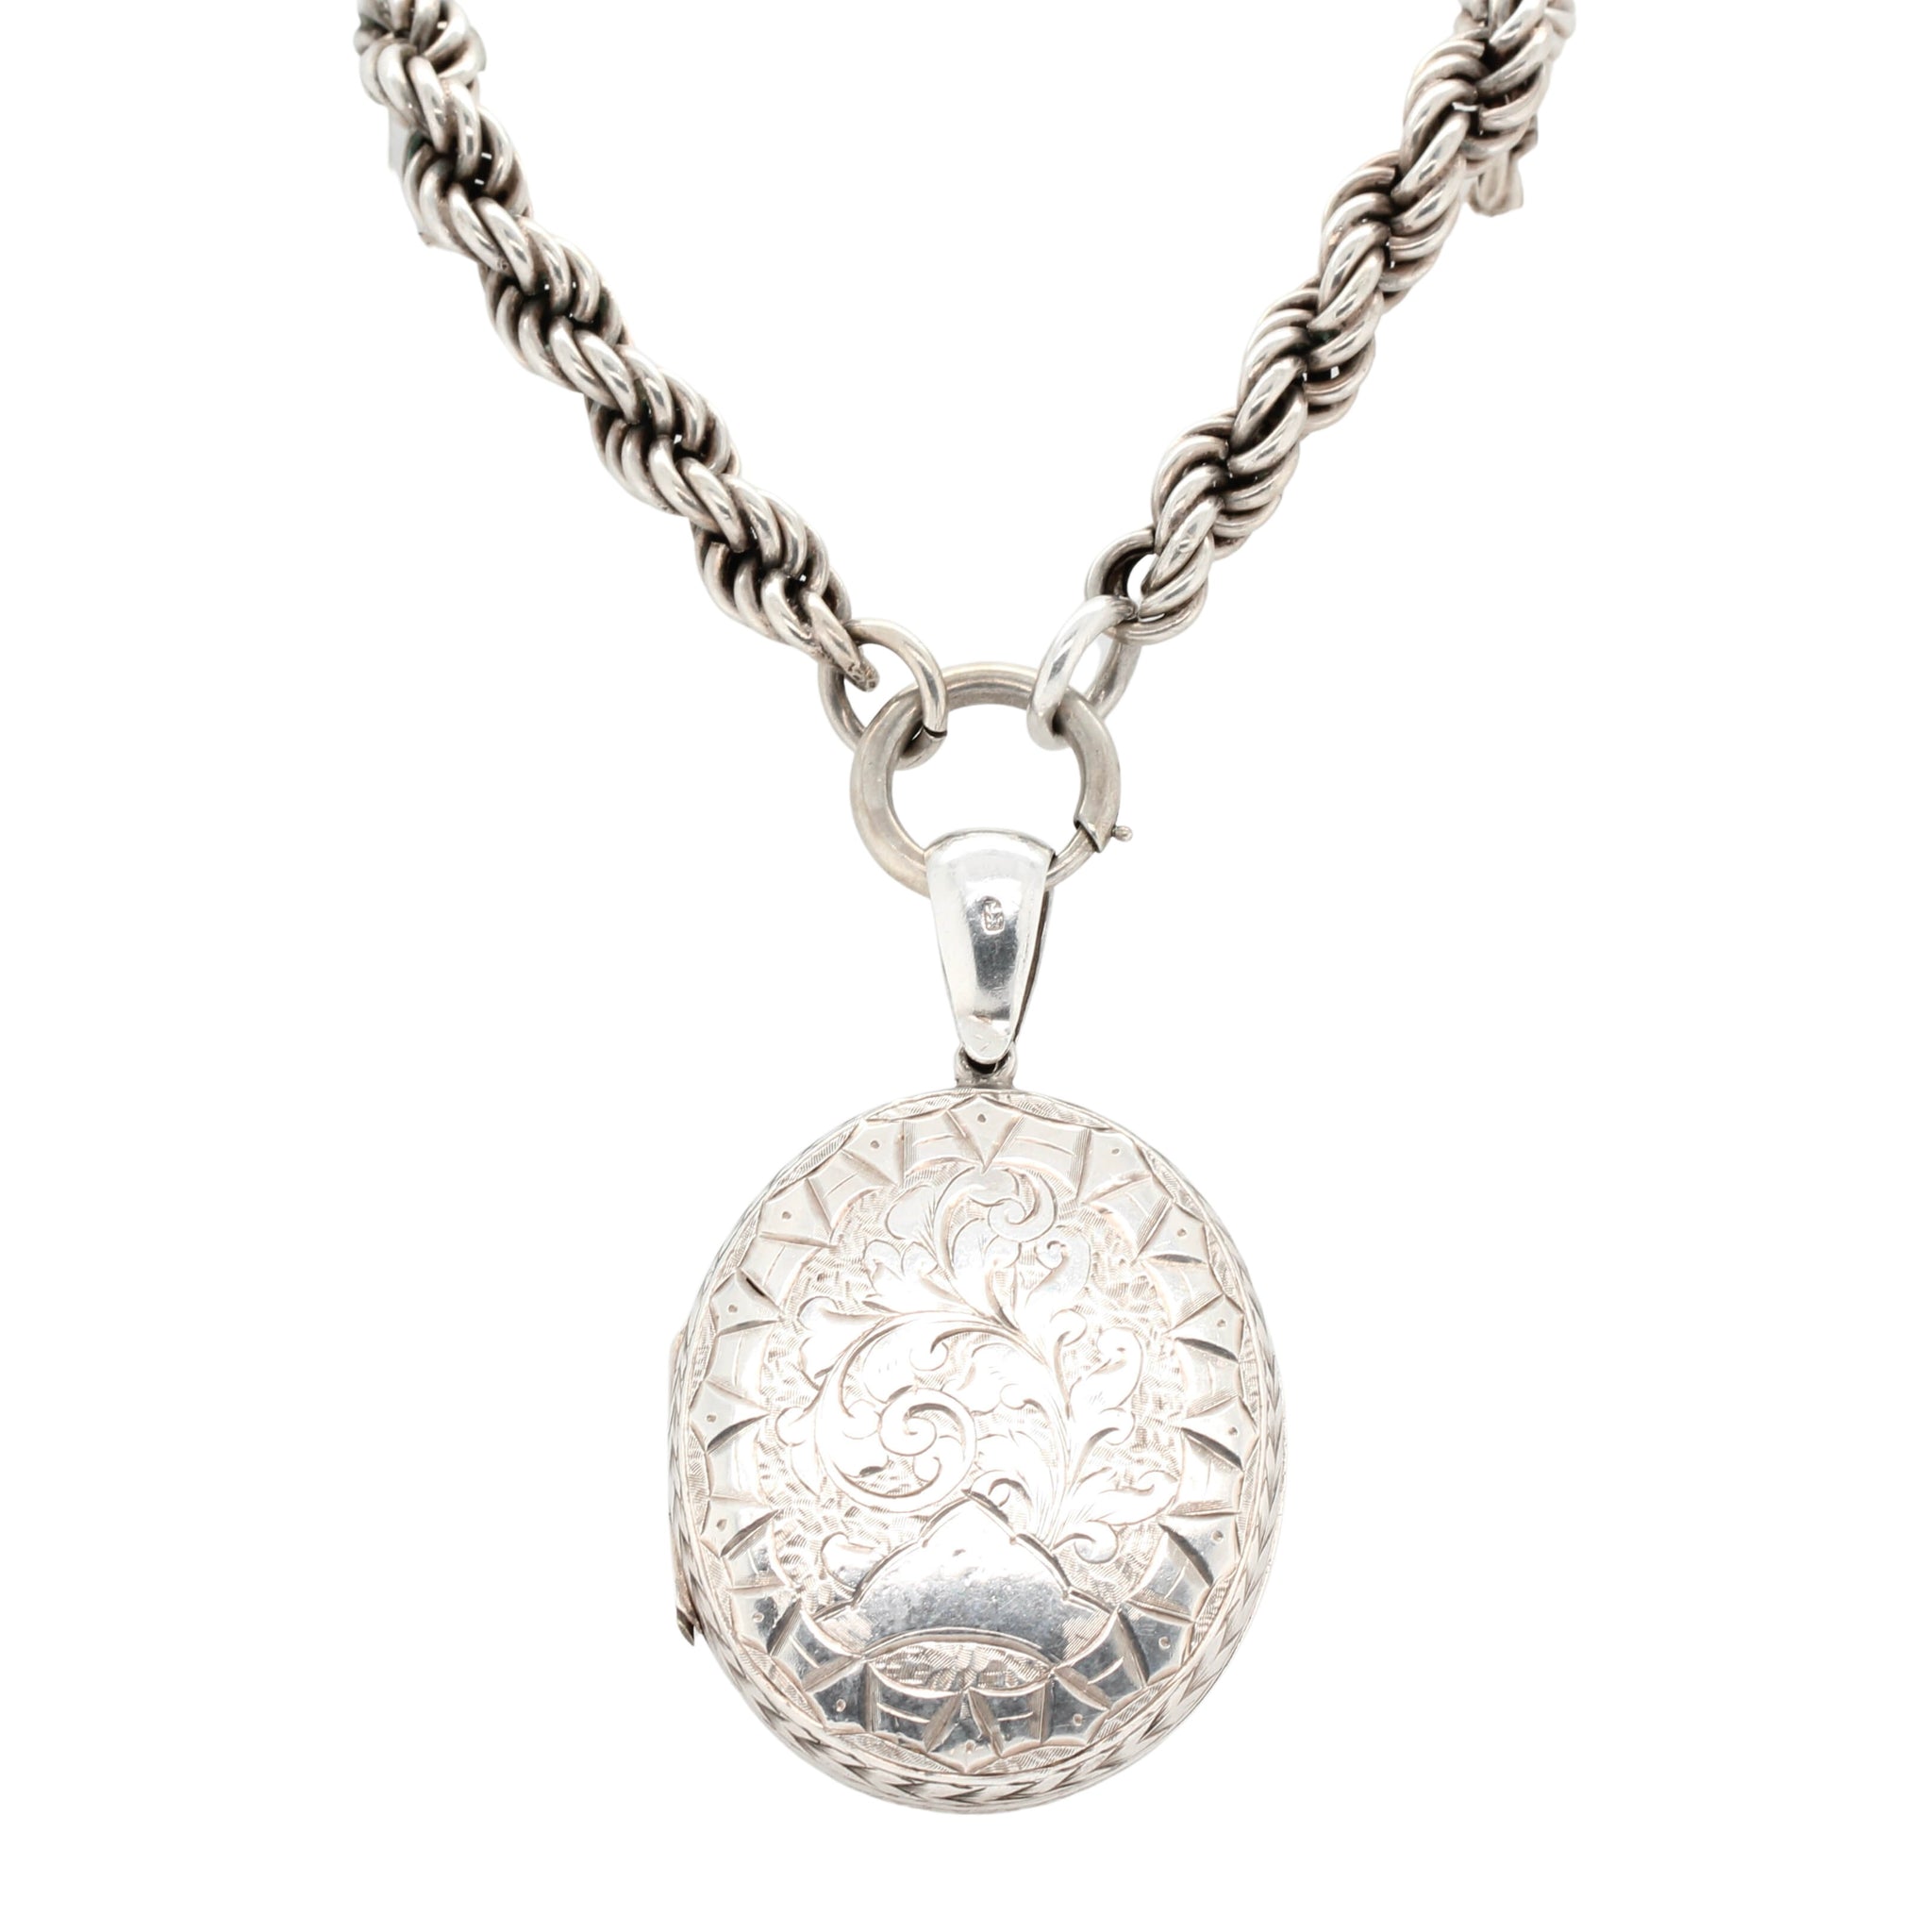 Victorian Silver Locket and Chain